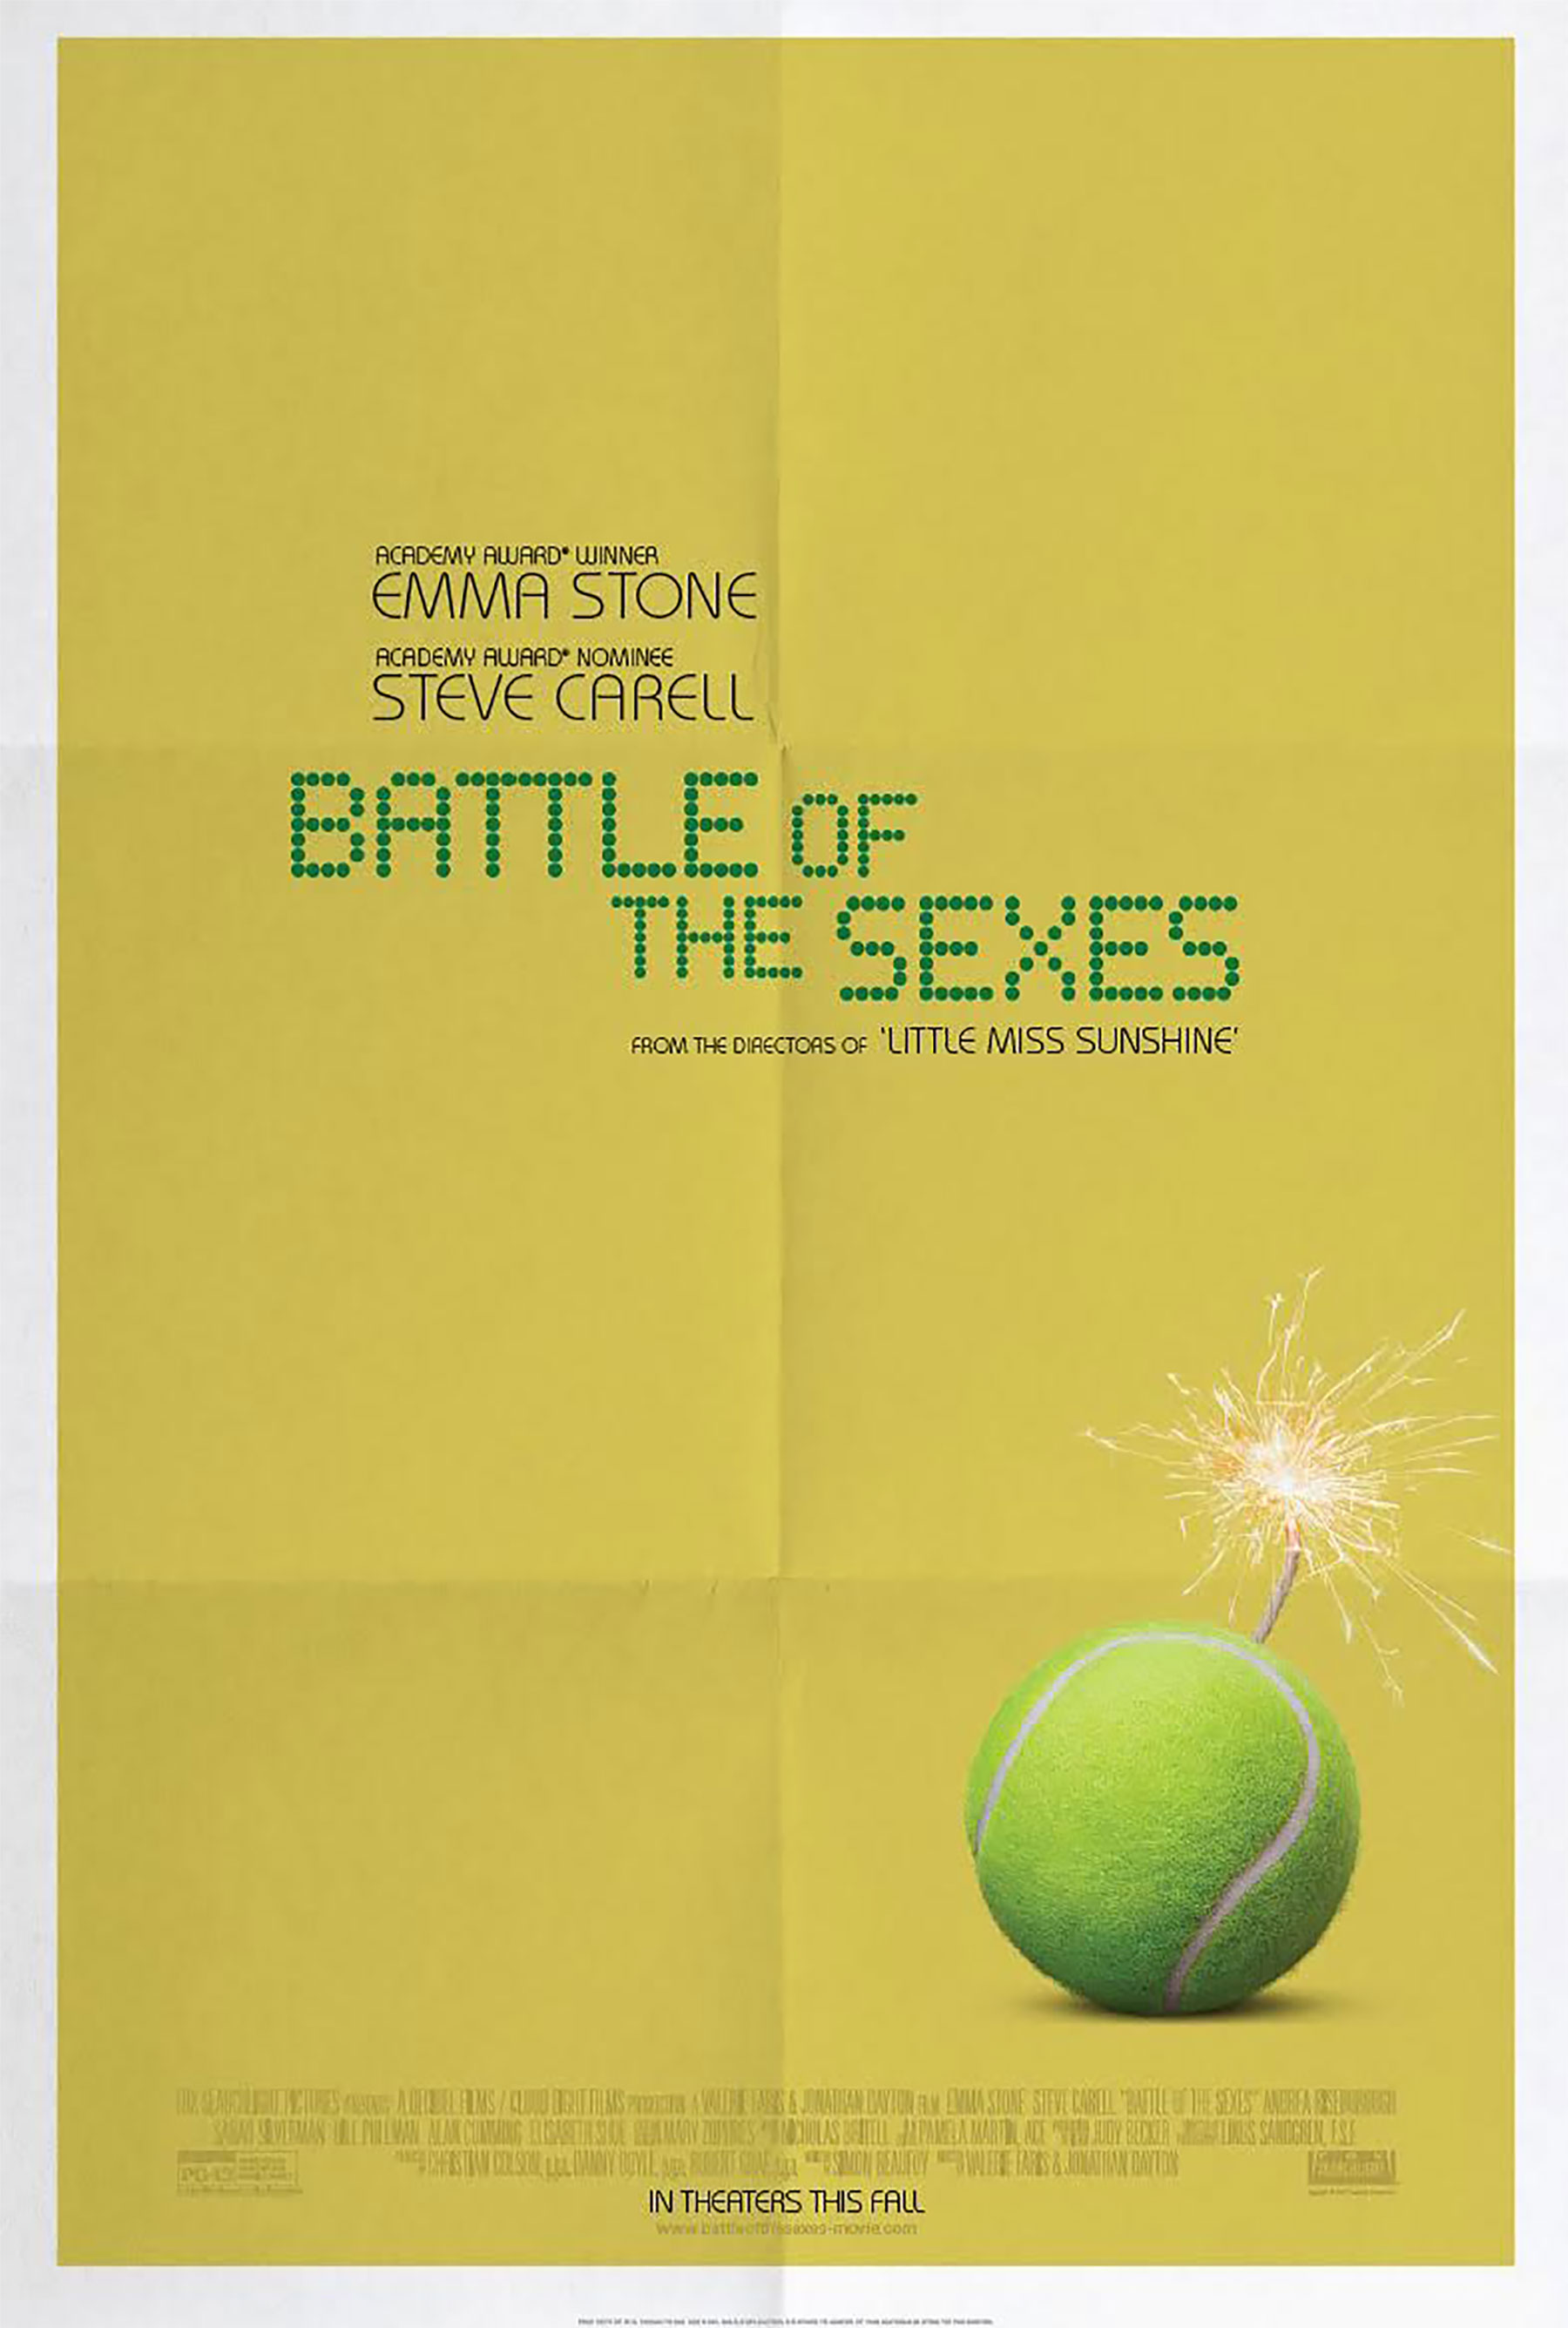 Alan Cumming on Why Battle of the Sexes is Definitely Relevant in